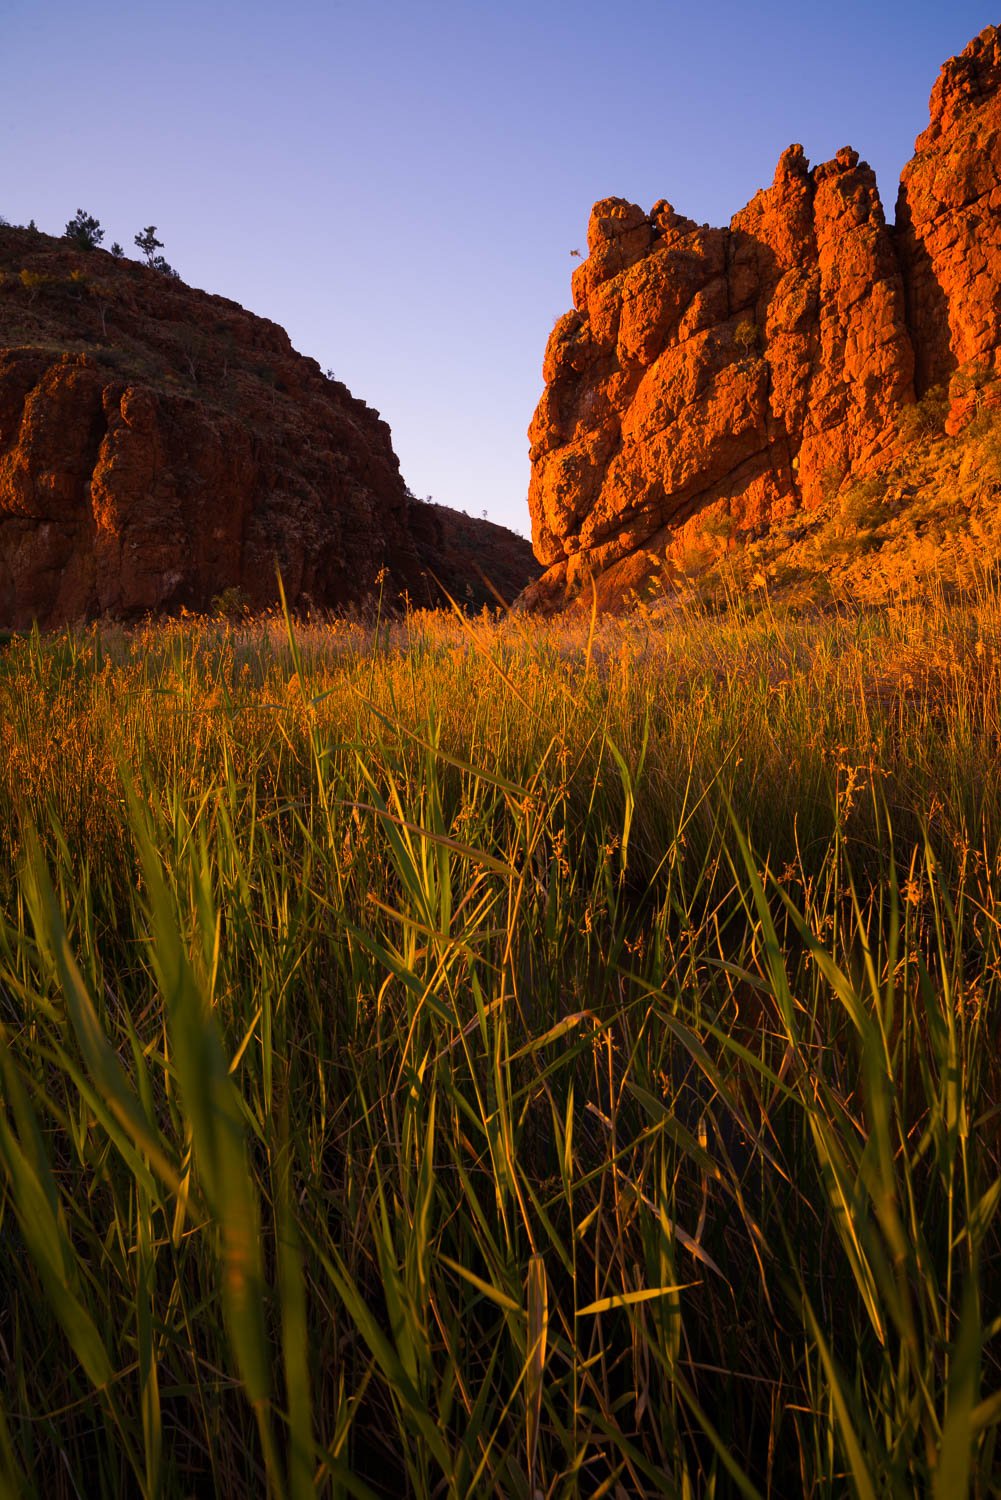 Long grass and crops with a high mountain wall in the background, Glen Helen Gorge reed bed, West MacDonnell Ranges - Northern Territory